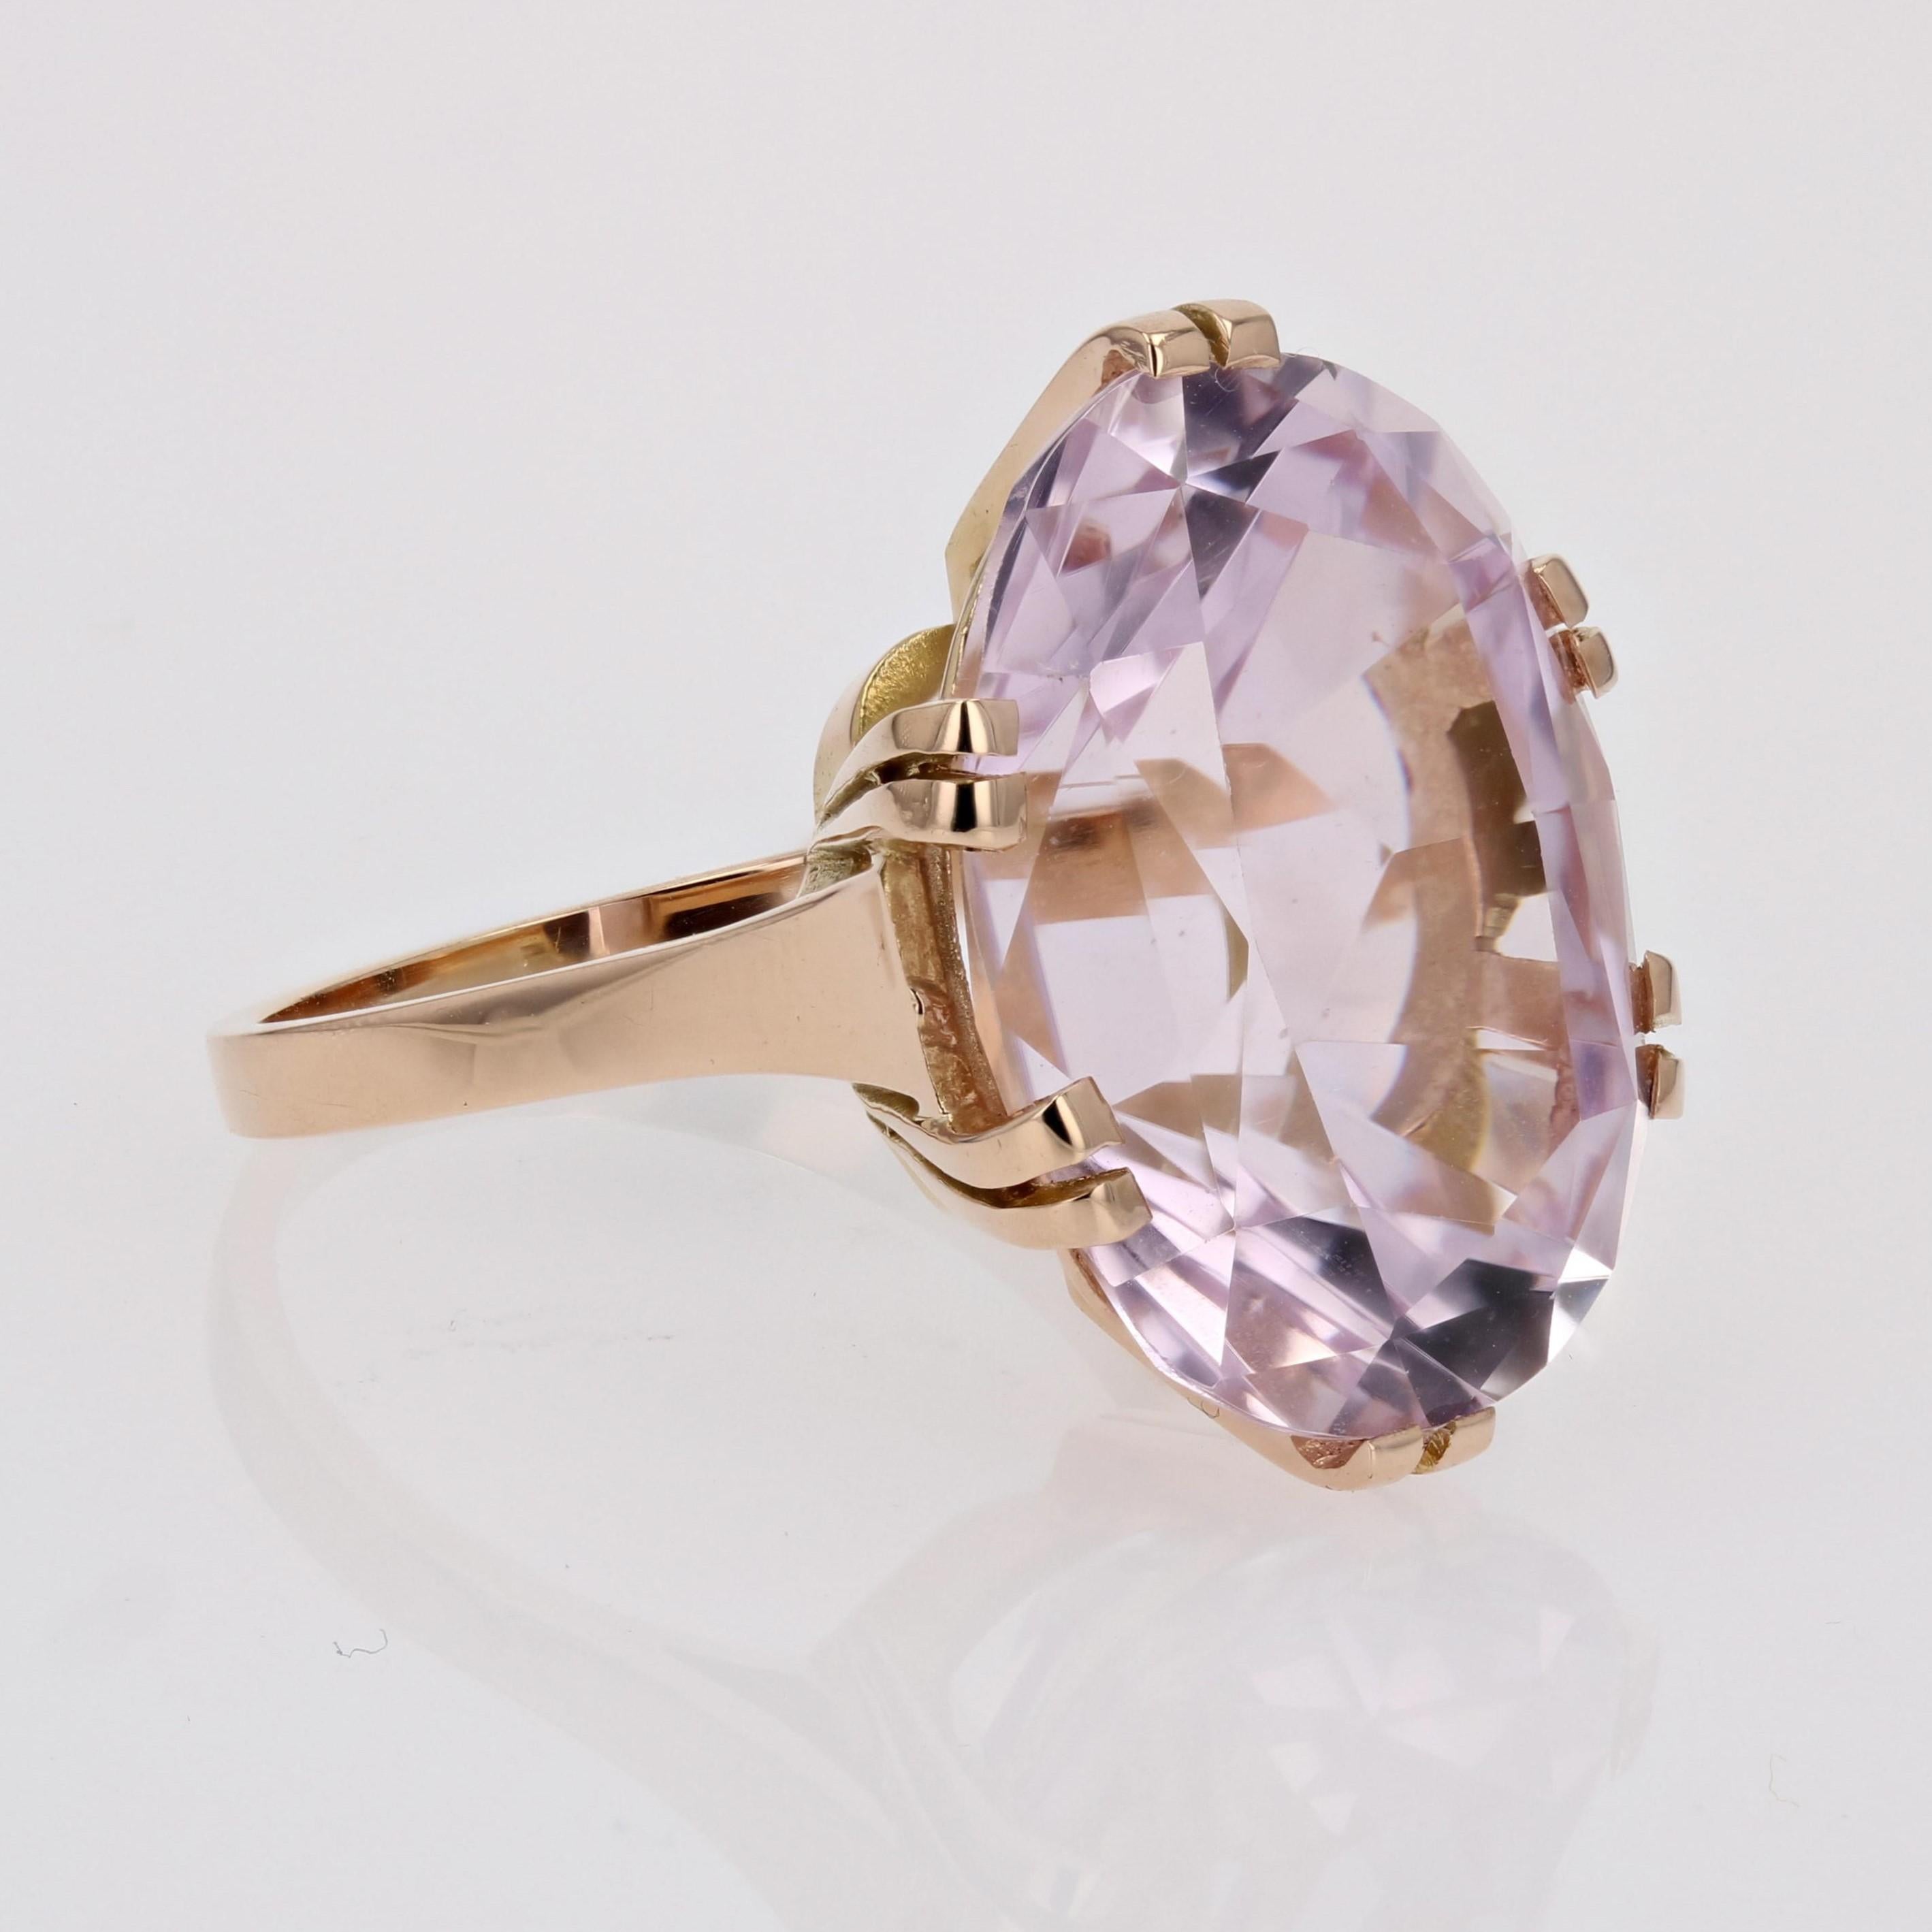 French Retro 1960s 17.71 Carats Kunzite 18 Karat Rose Gold Cocktail Ring For Sale 6